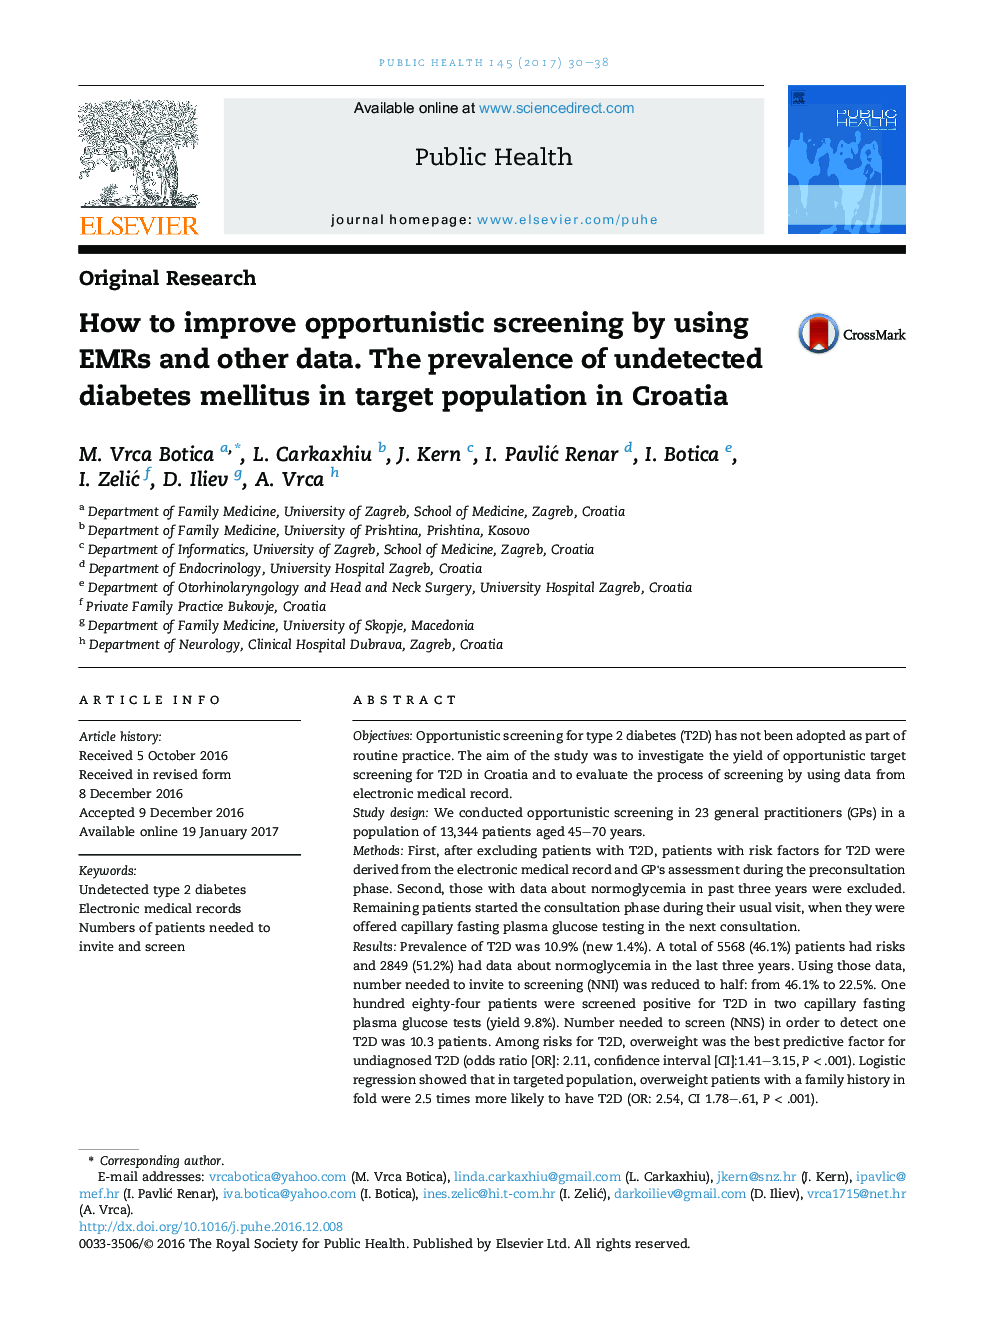 How to improve opportunistic screening by using EMRs and other data. The prevalence of undetected diabetes mellitus in target population in Croatia